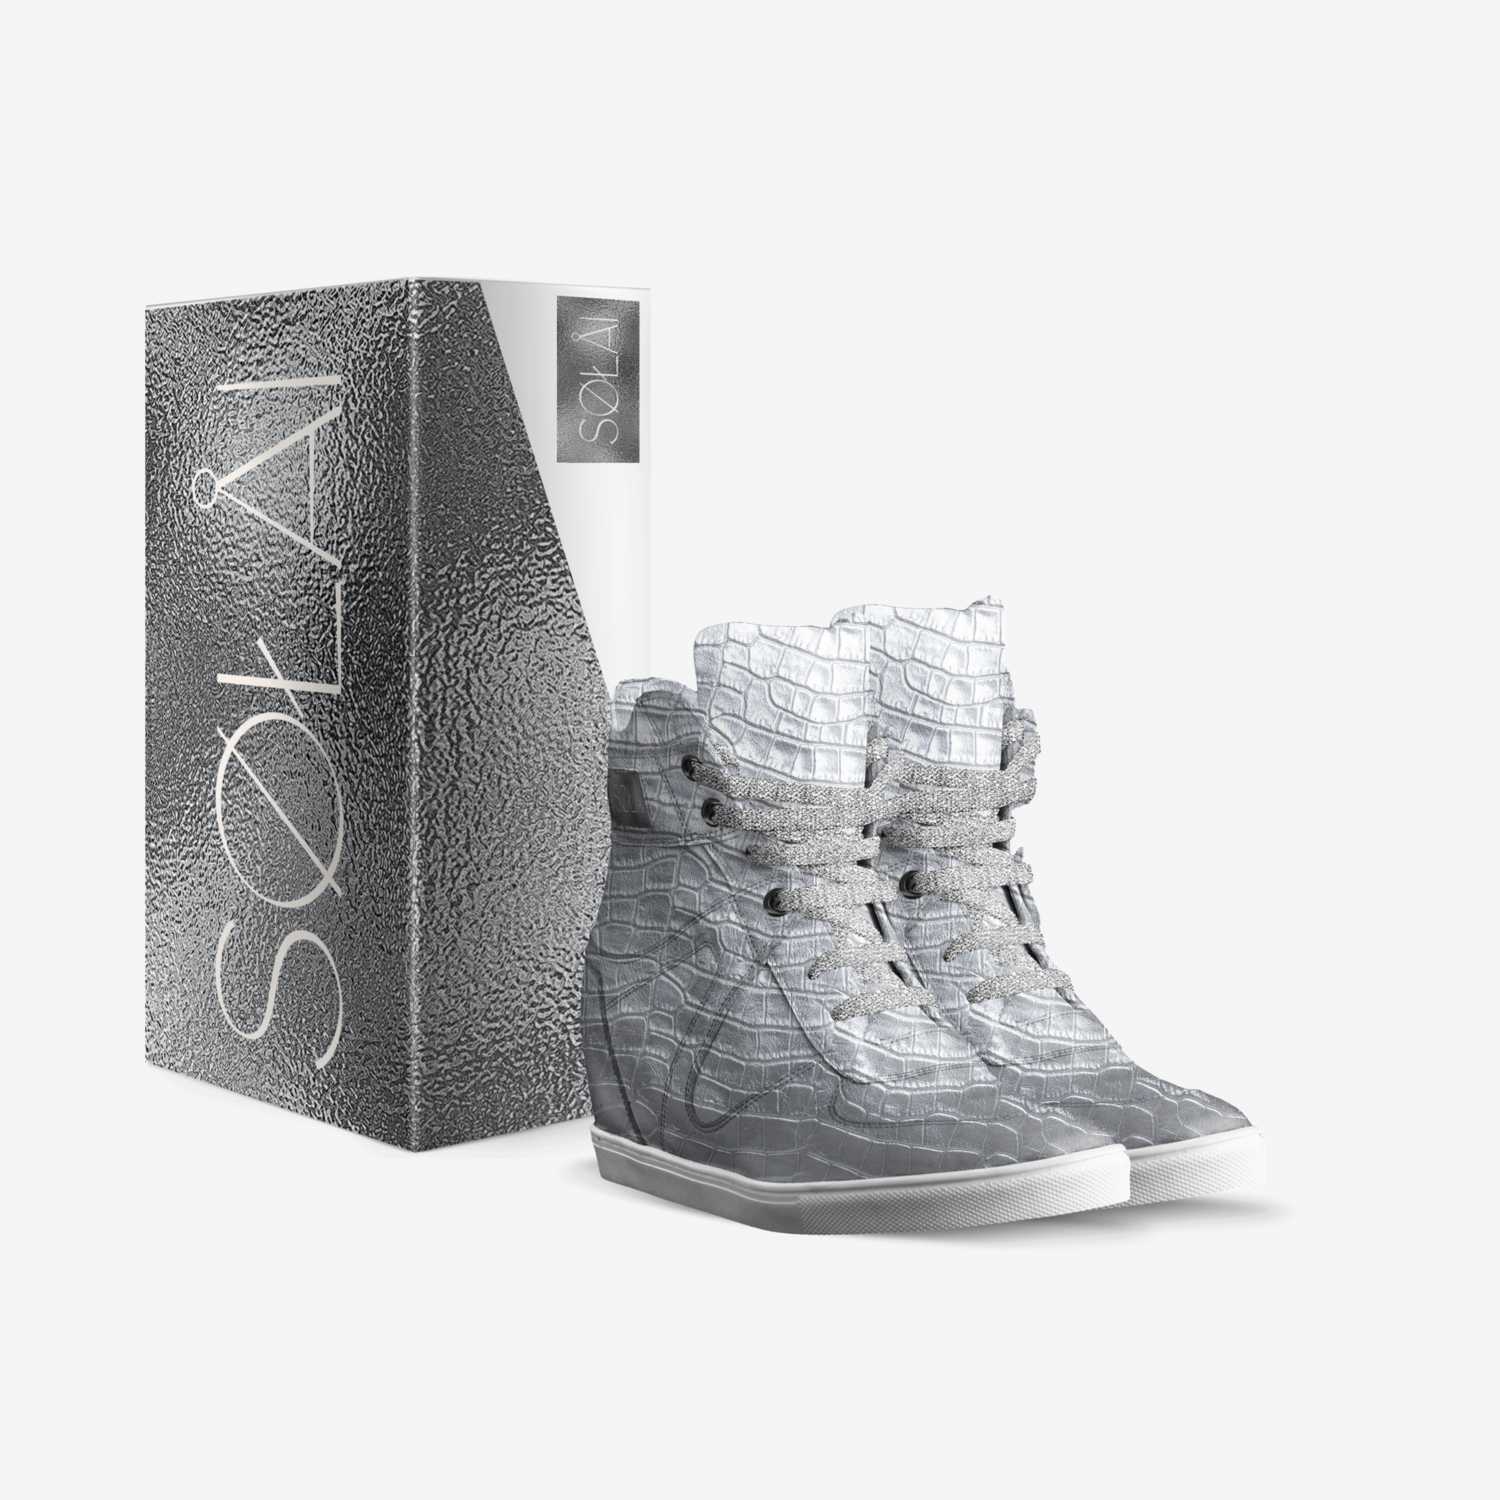 SOLAI custom made in Italy shoes by Shauntay Stewart | Box view